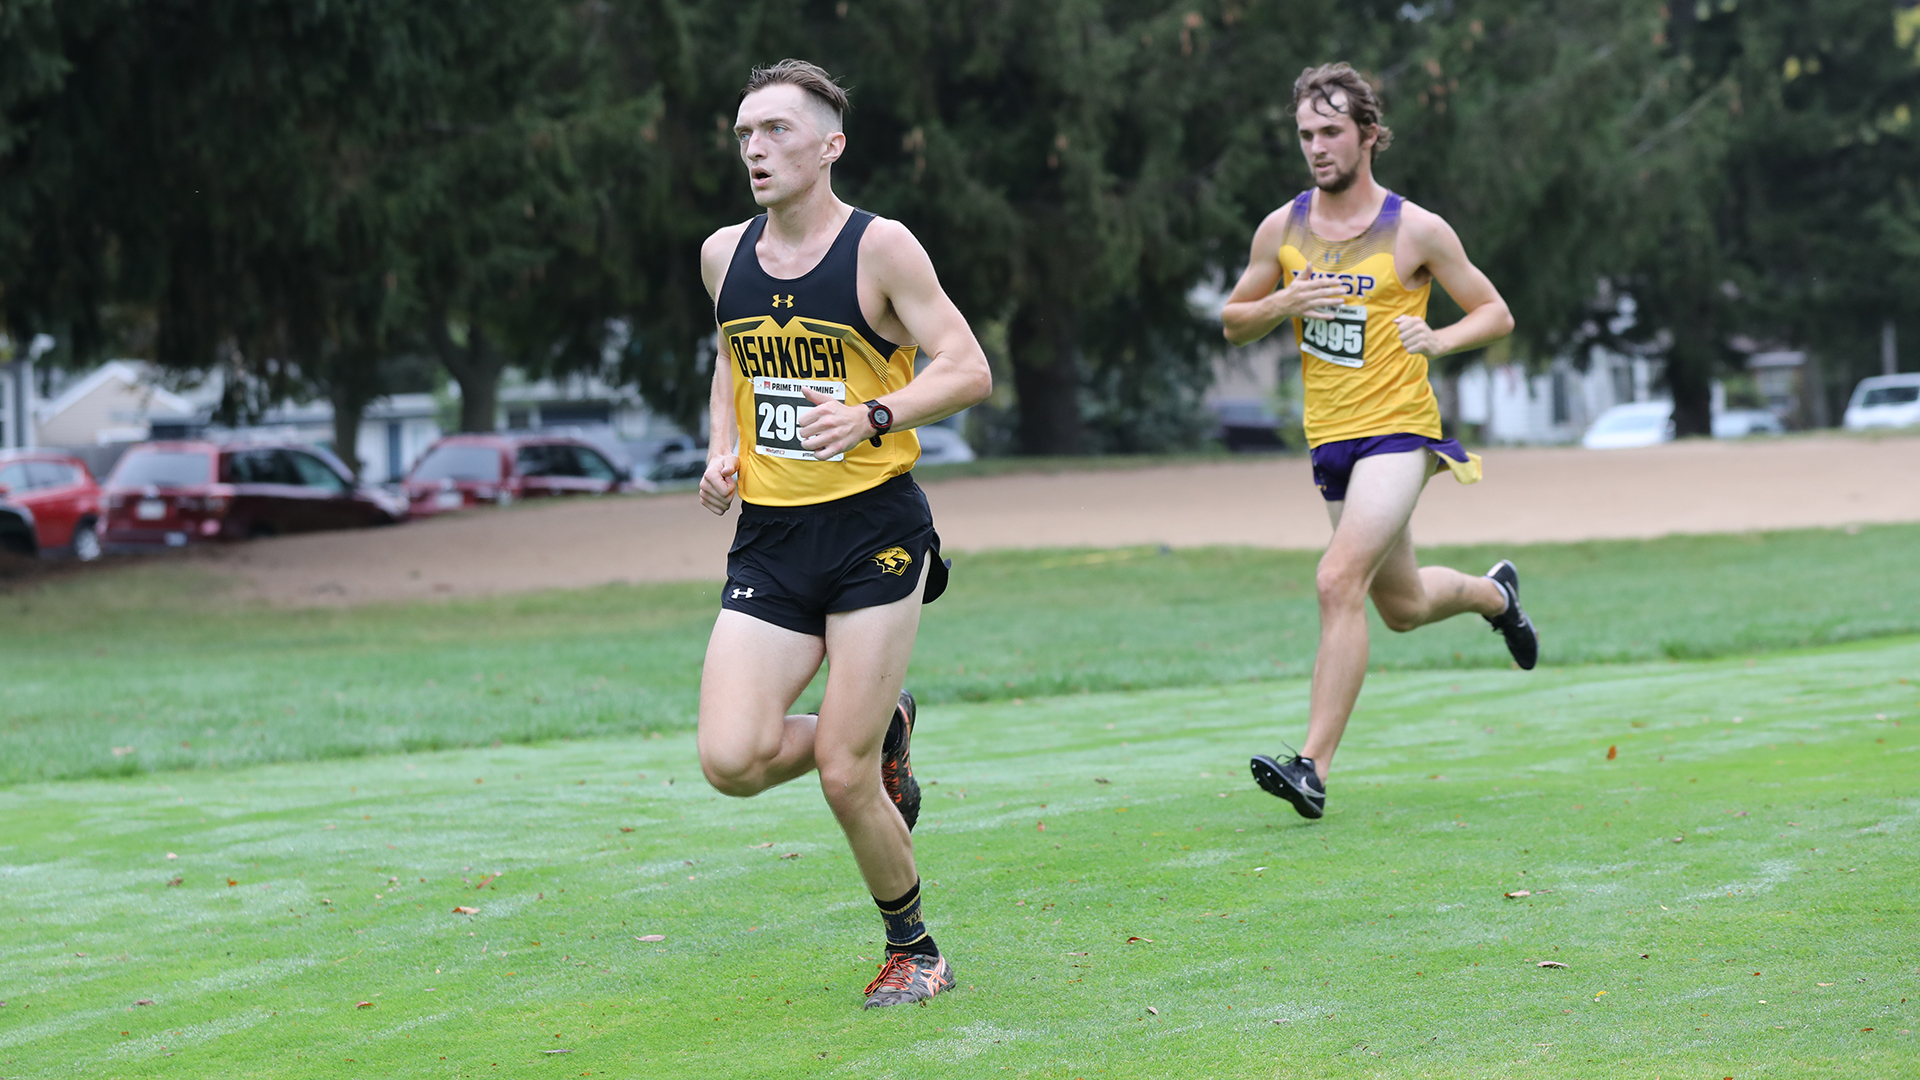 Ryan Dolnik finished fifth among 52 runners at the Ripon College Red Hawk Open.